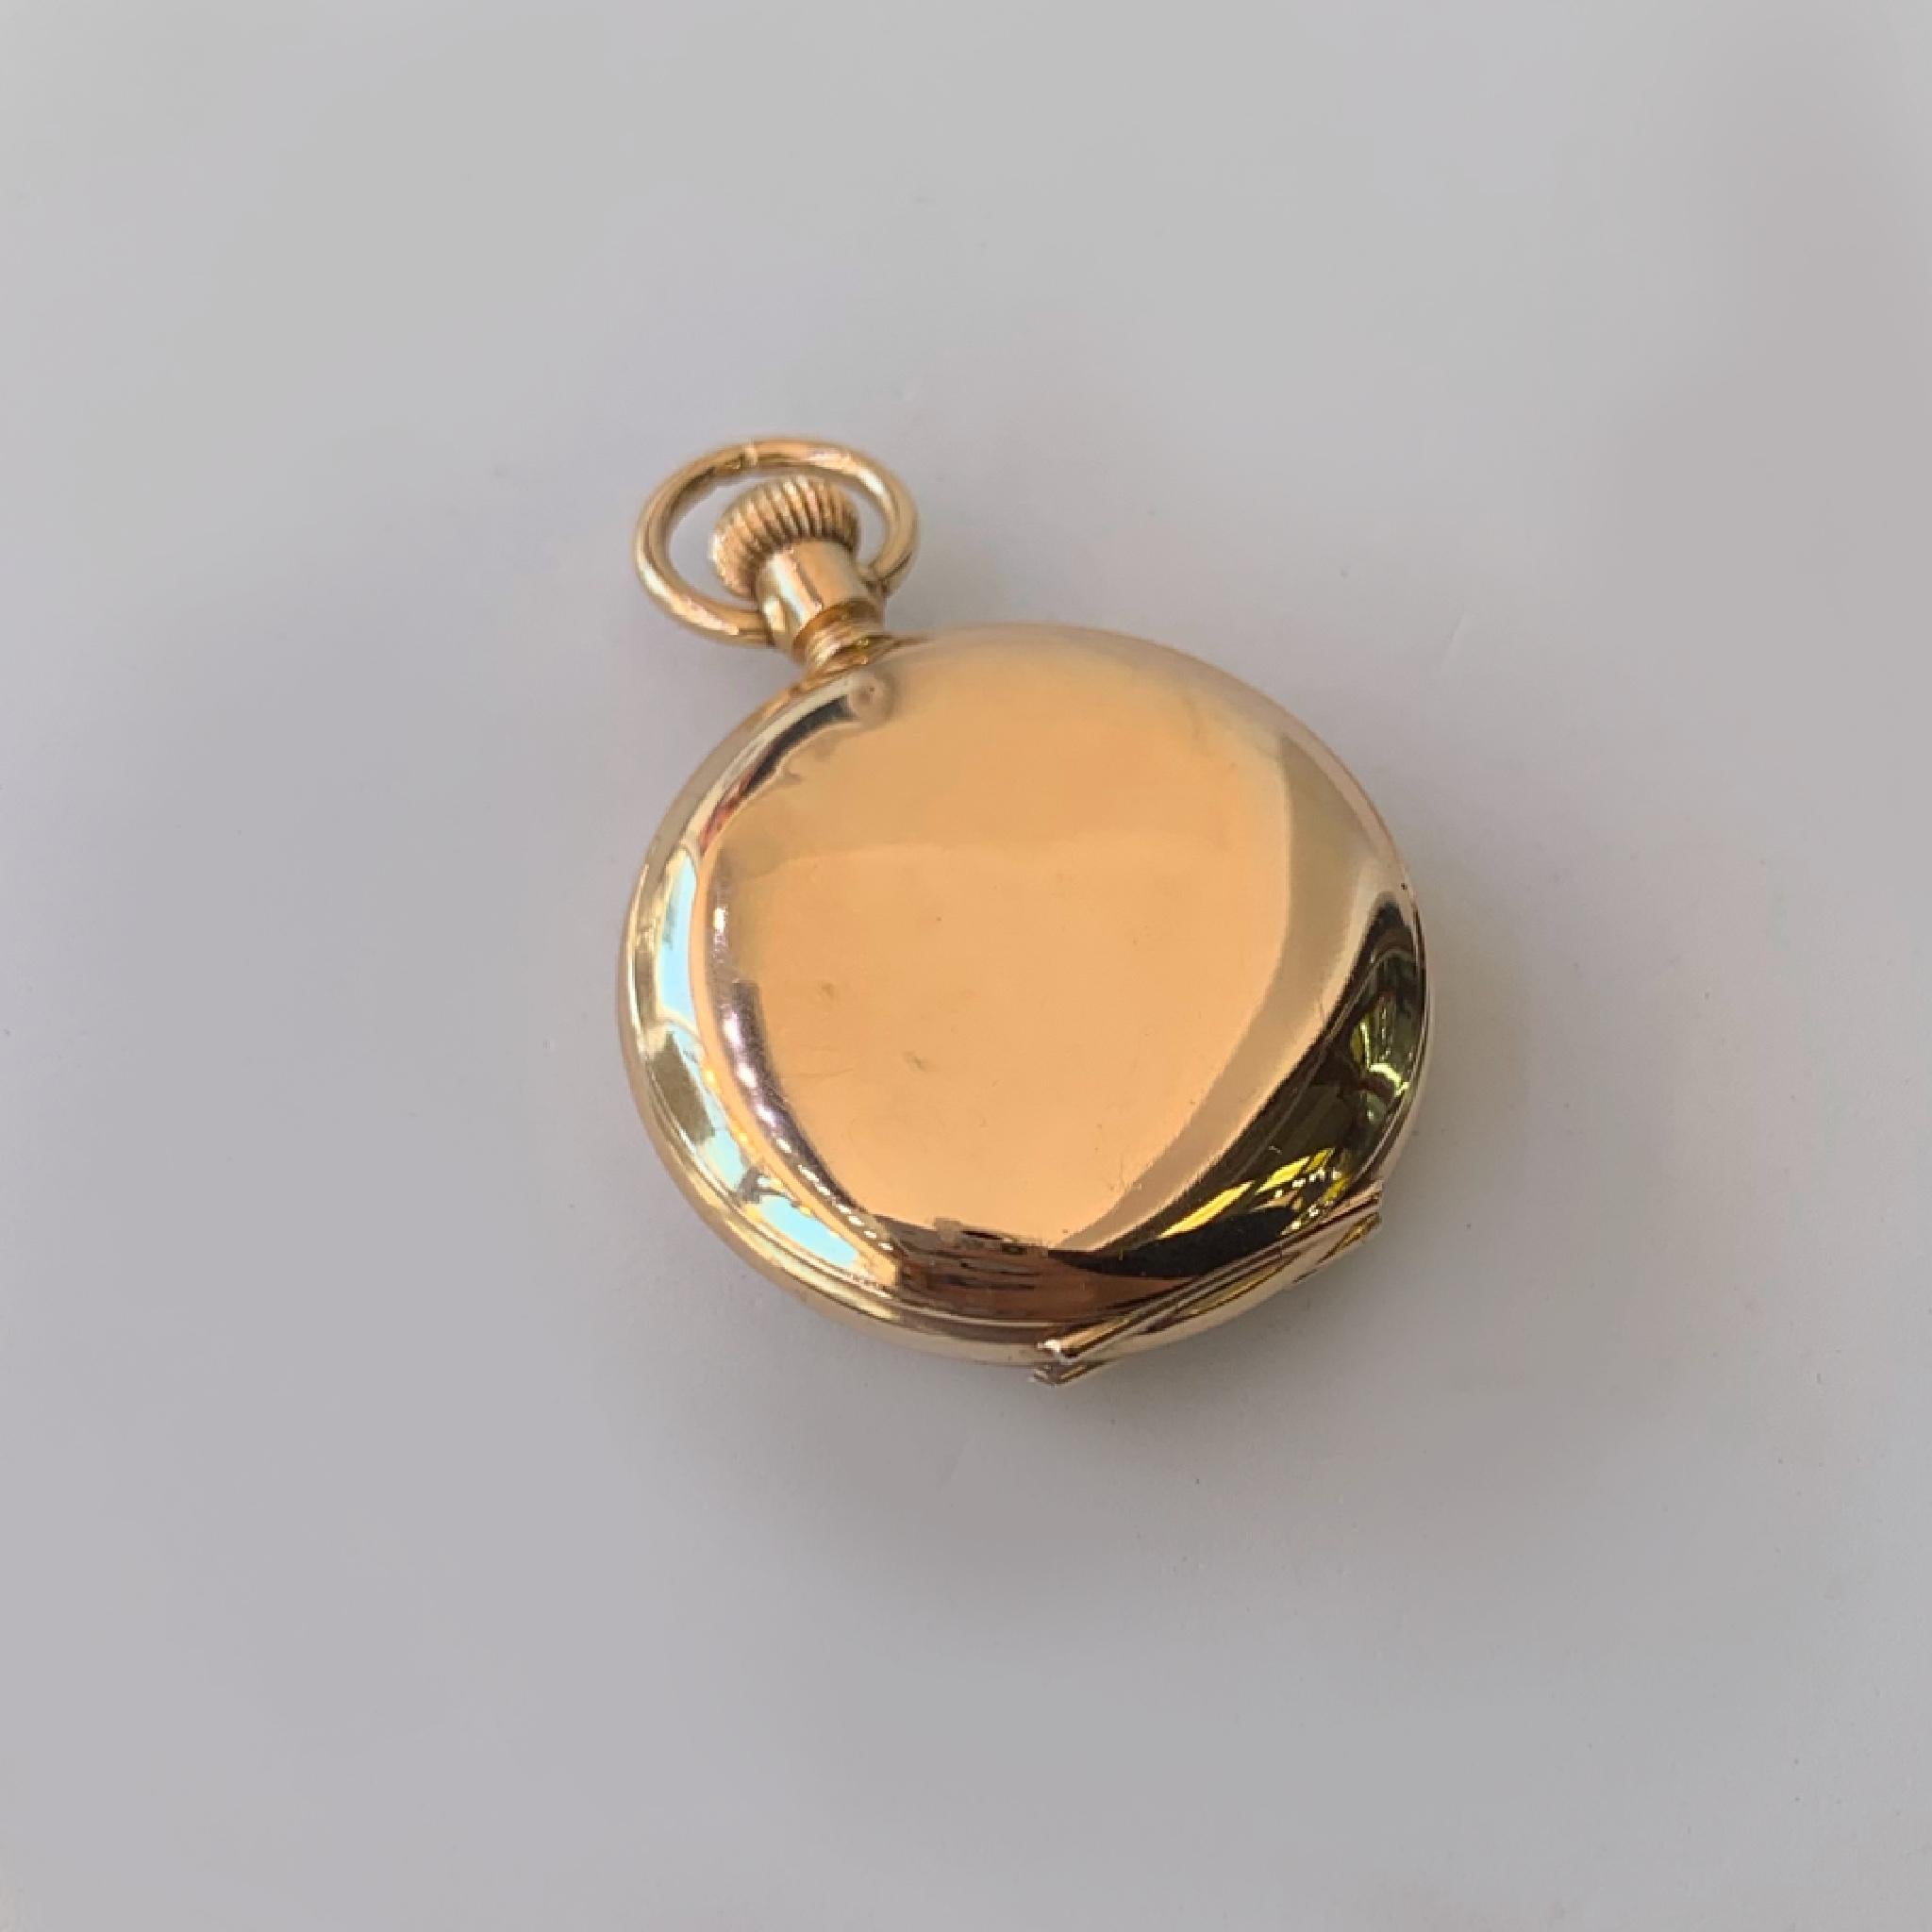 Antique Elgin 14 Karat Gold and Diamond Pocket Watch In Good Condition For Sale In Los Angeles, CA